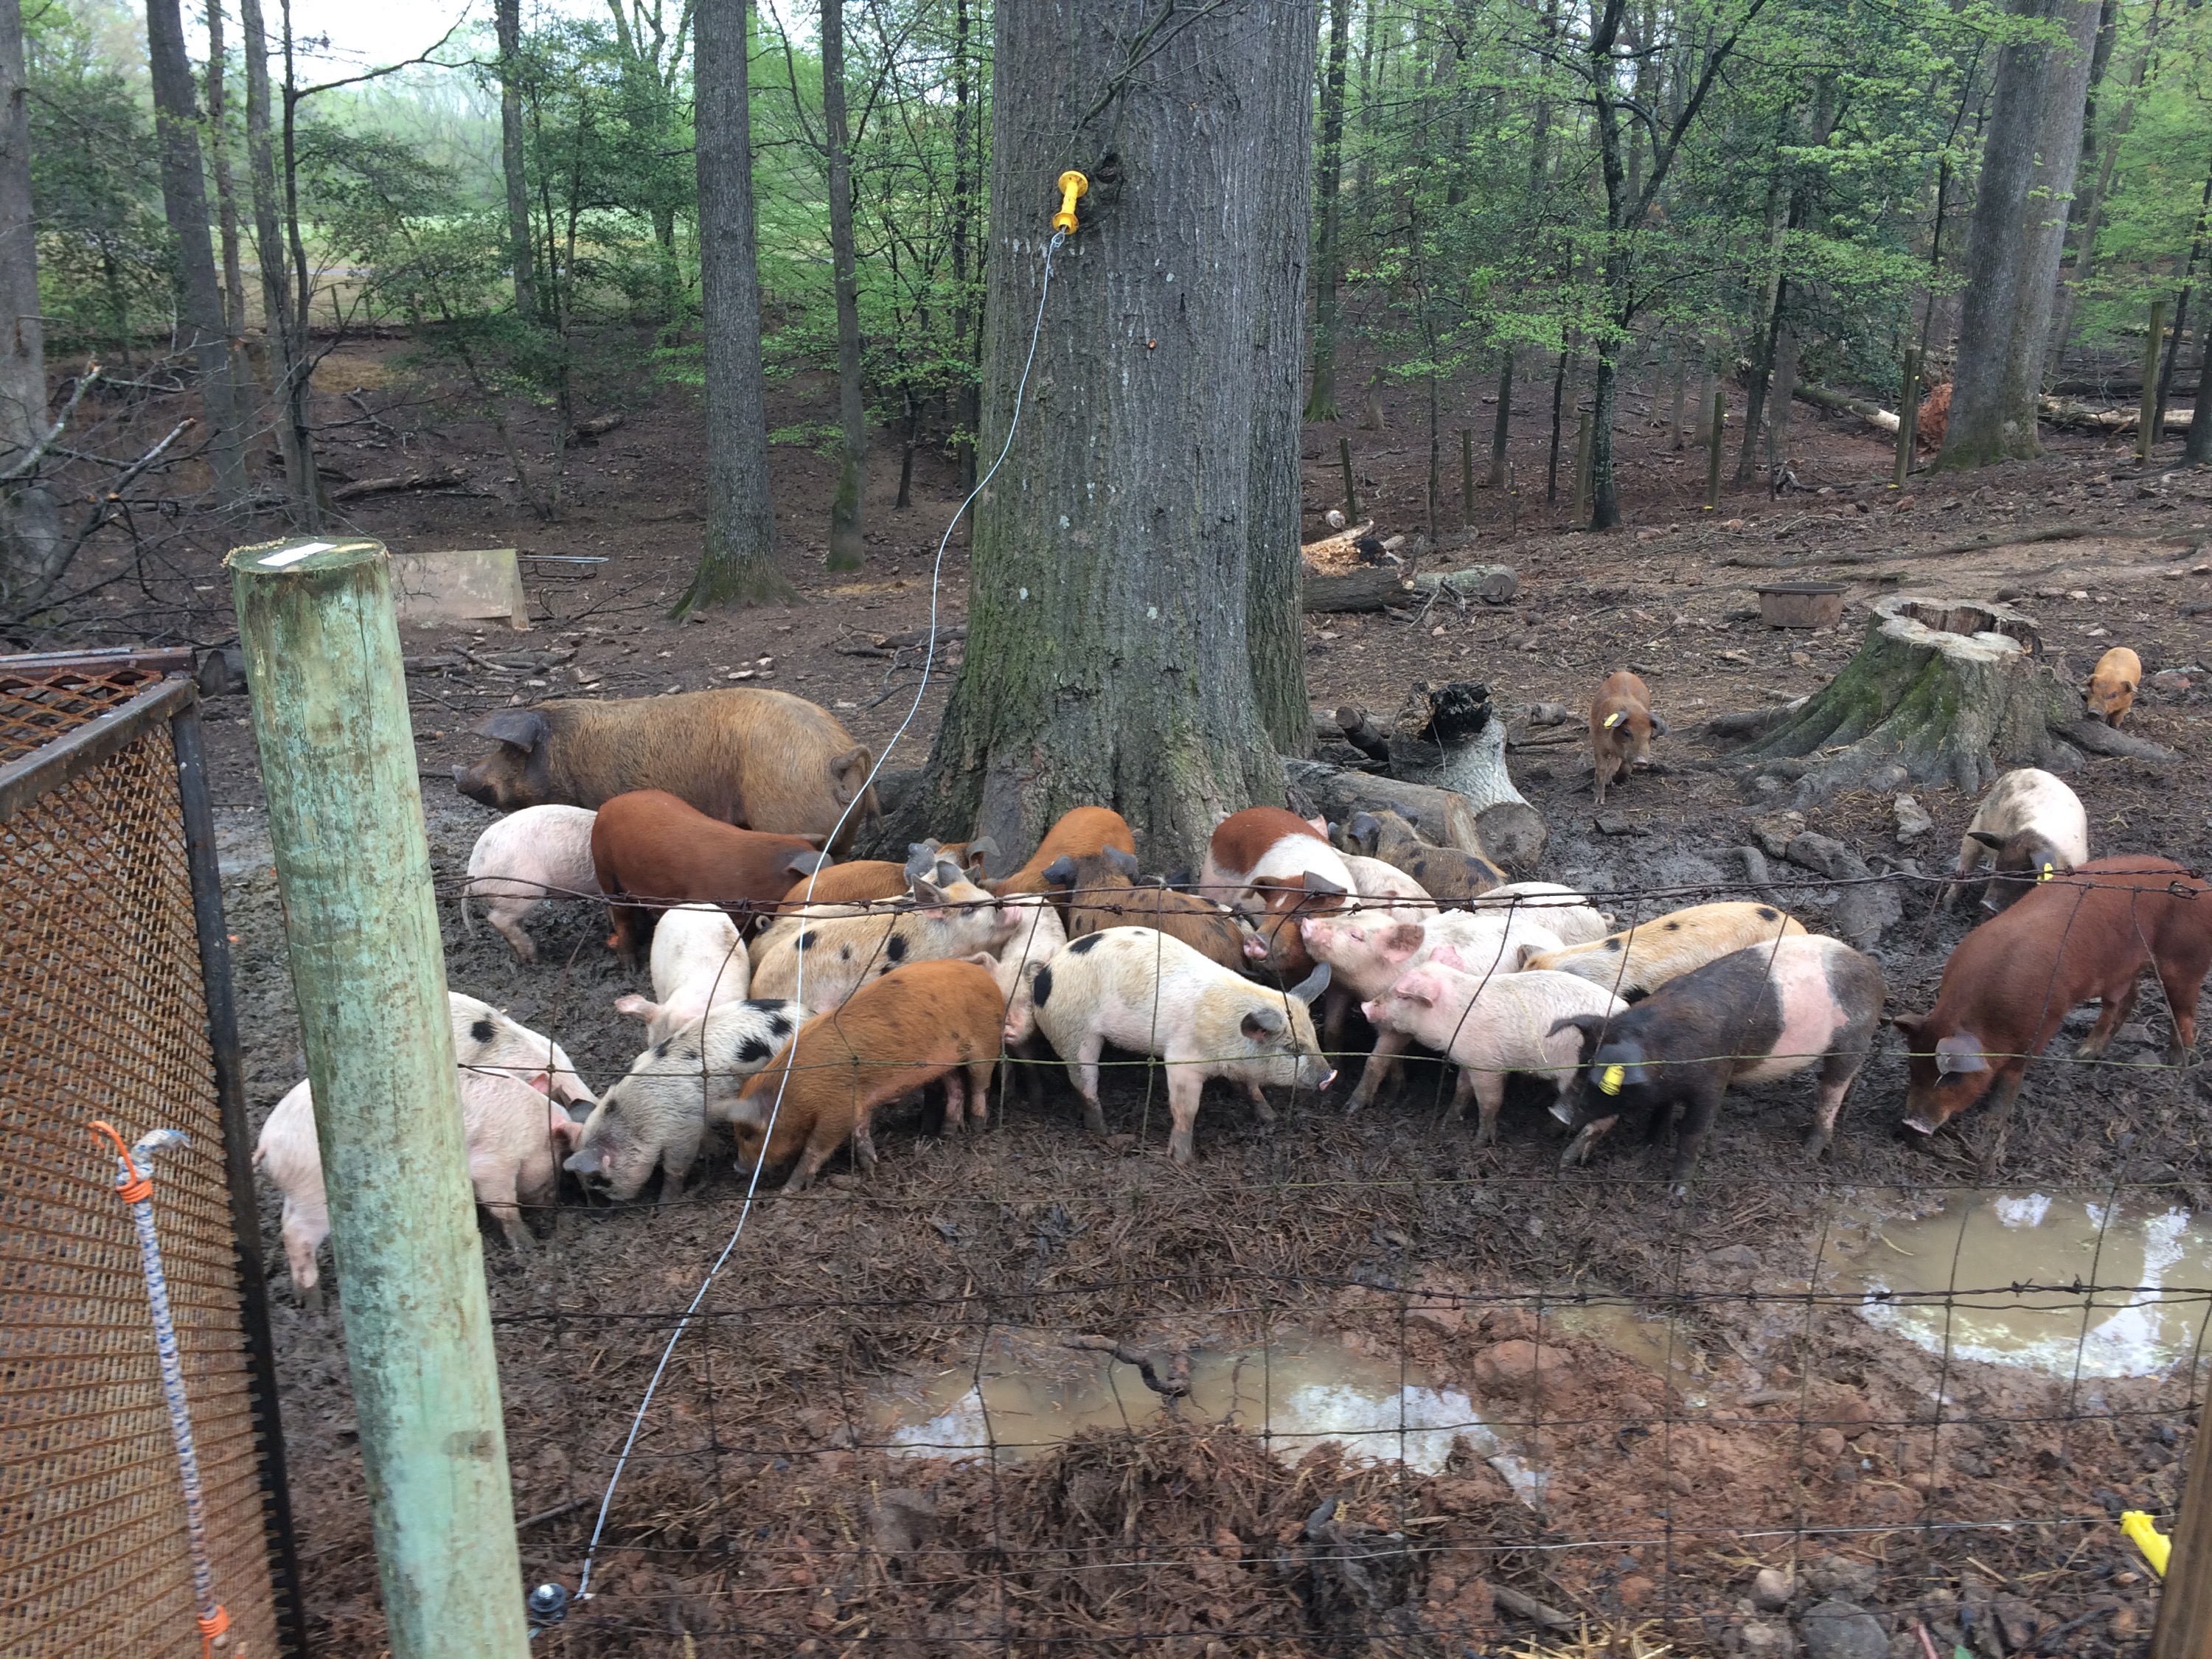 Pigs in the paddock, causing a ruckus